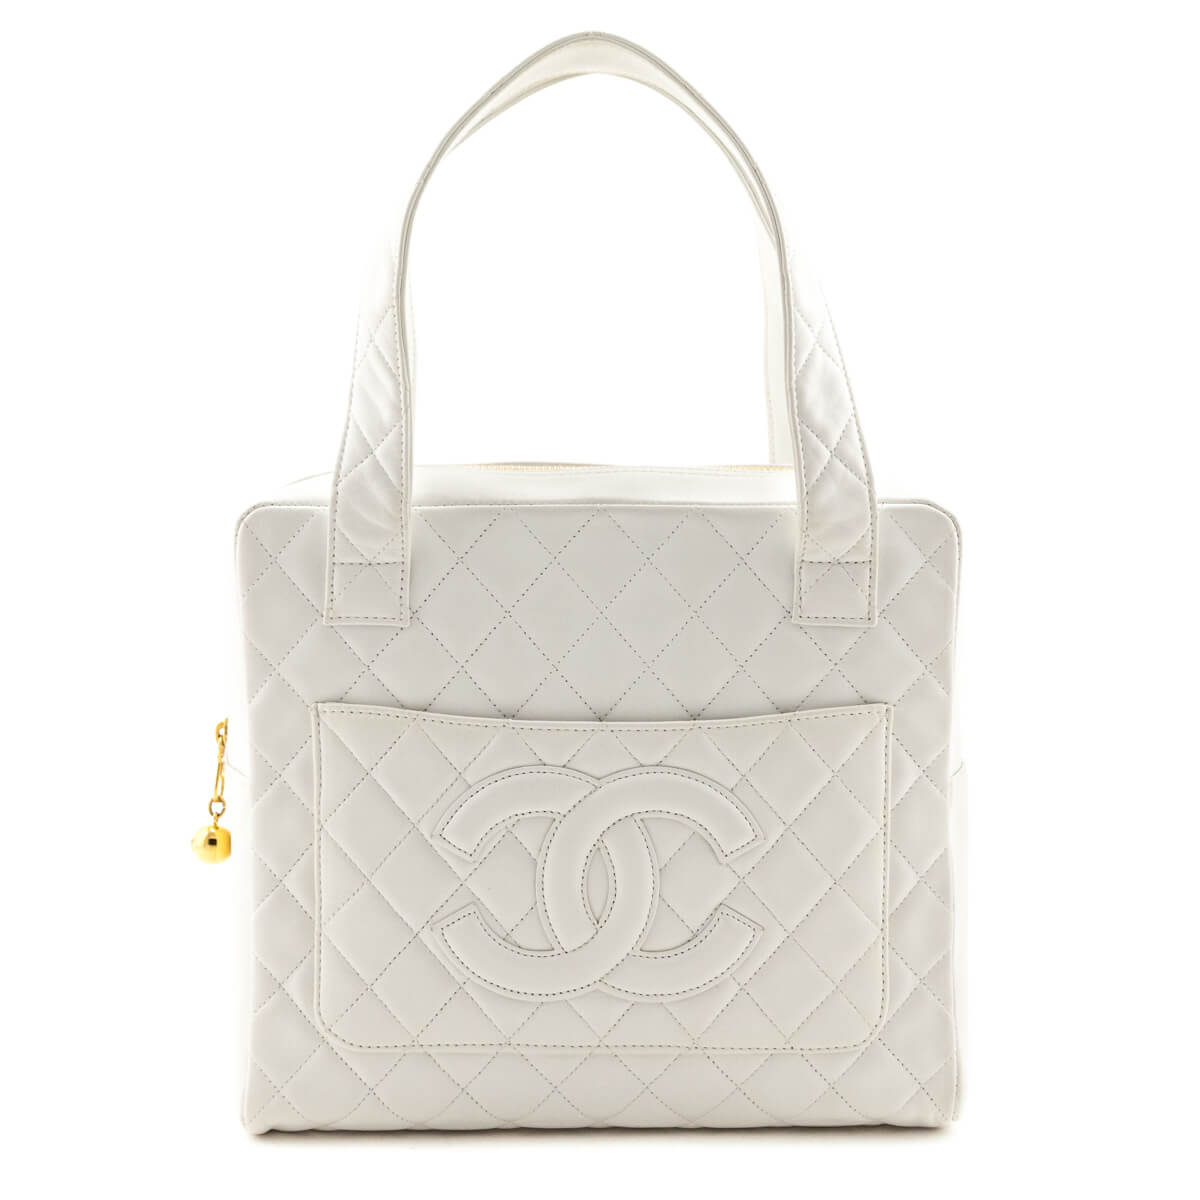 Chanel White Quilted Lambskin Vintage CC Tote Bag - Love that Bag etc - Preowned Authentic Designer Handbags & Preloved Fashions